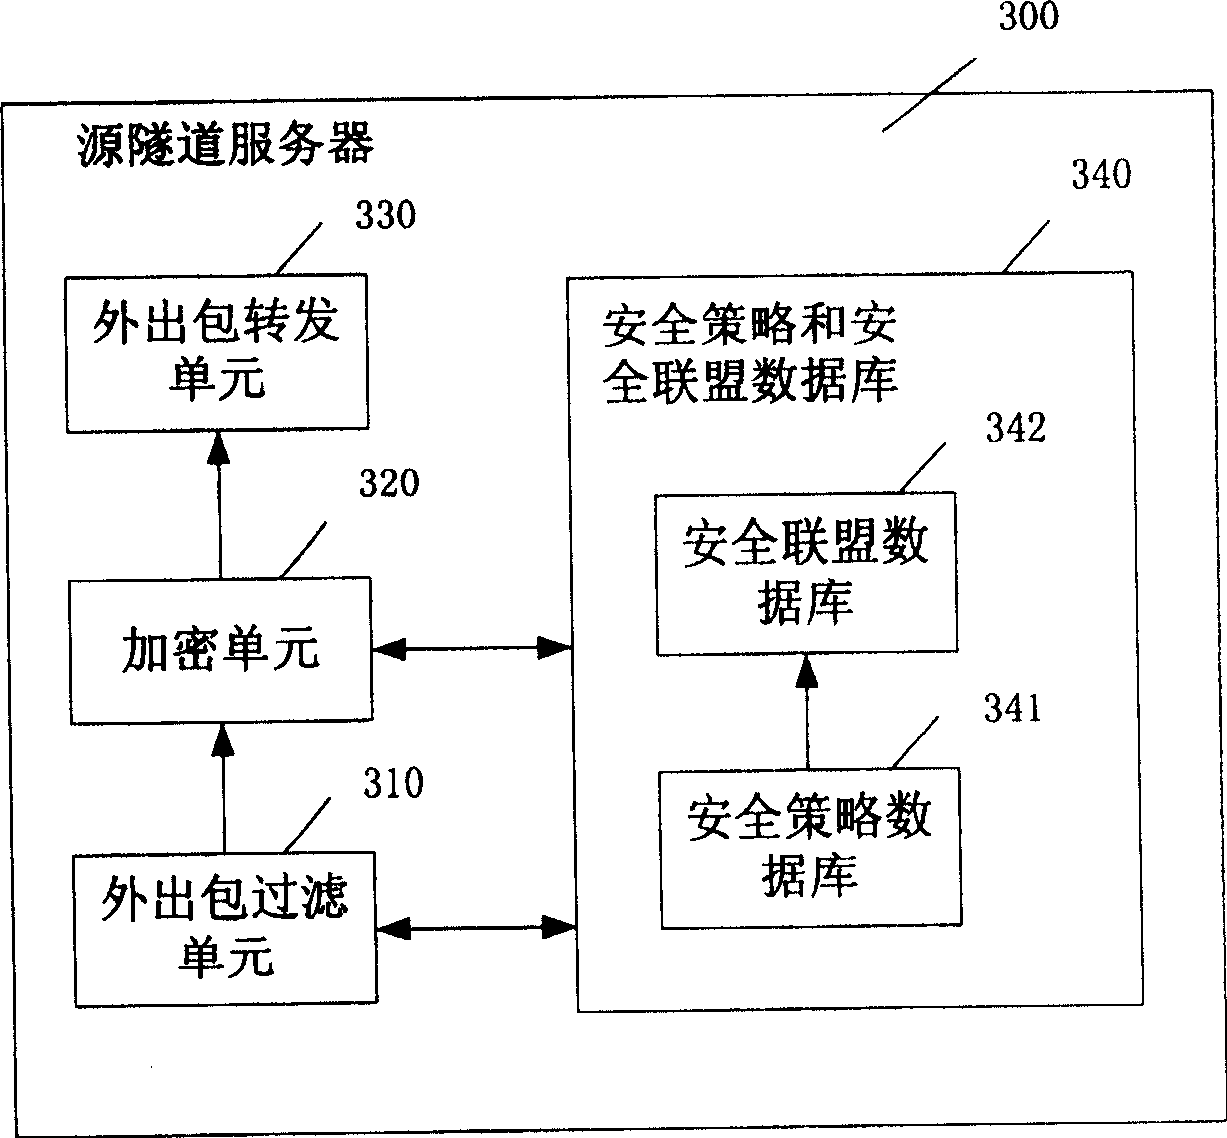 Forwarding engine state detecting method and routing device